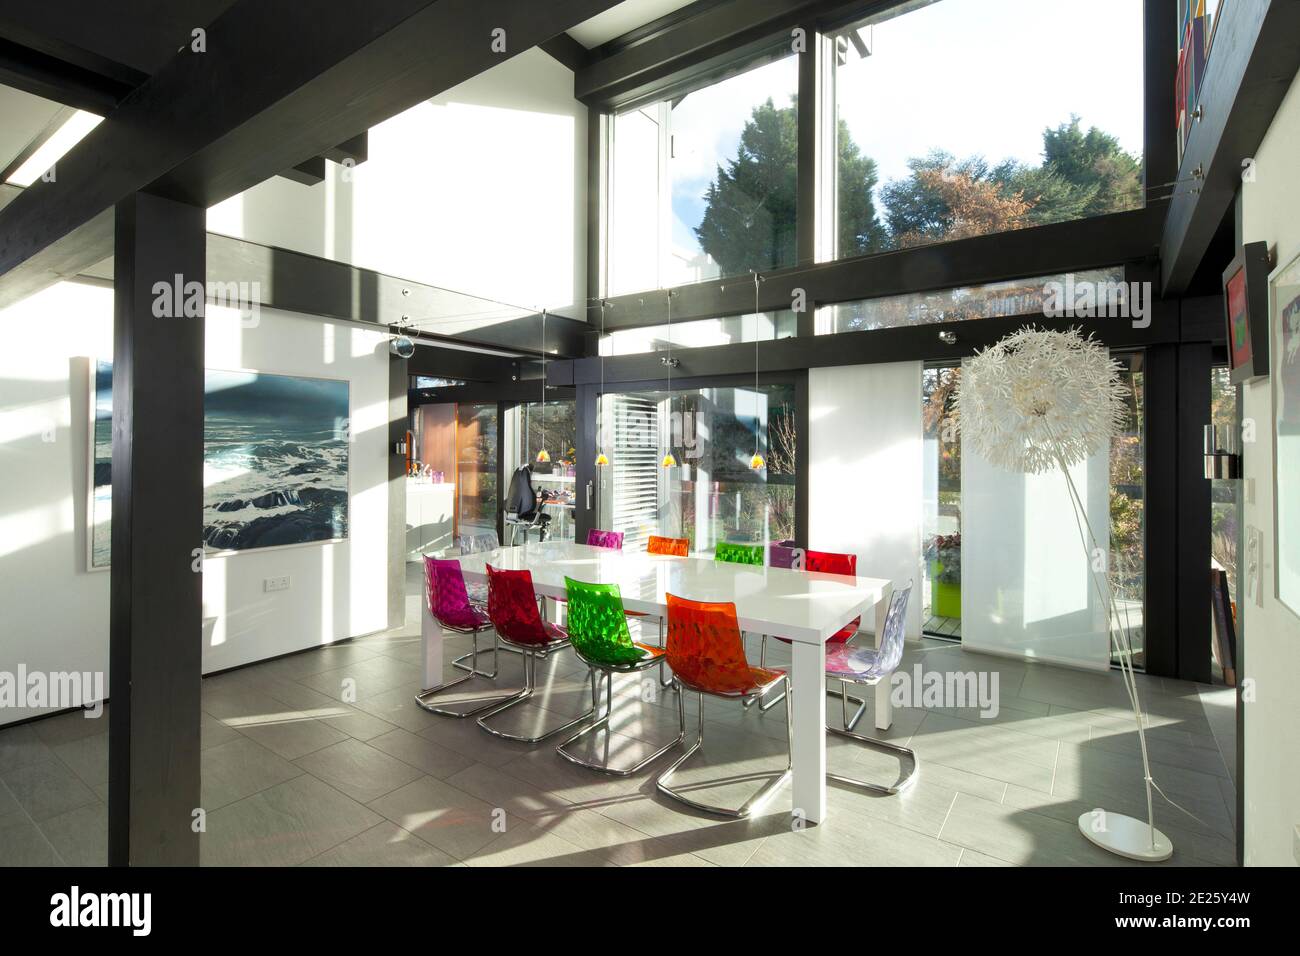 Dining area in huf haus with colourful chairs in sunlight Stock Photo